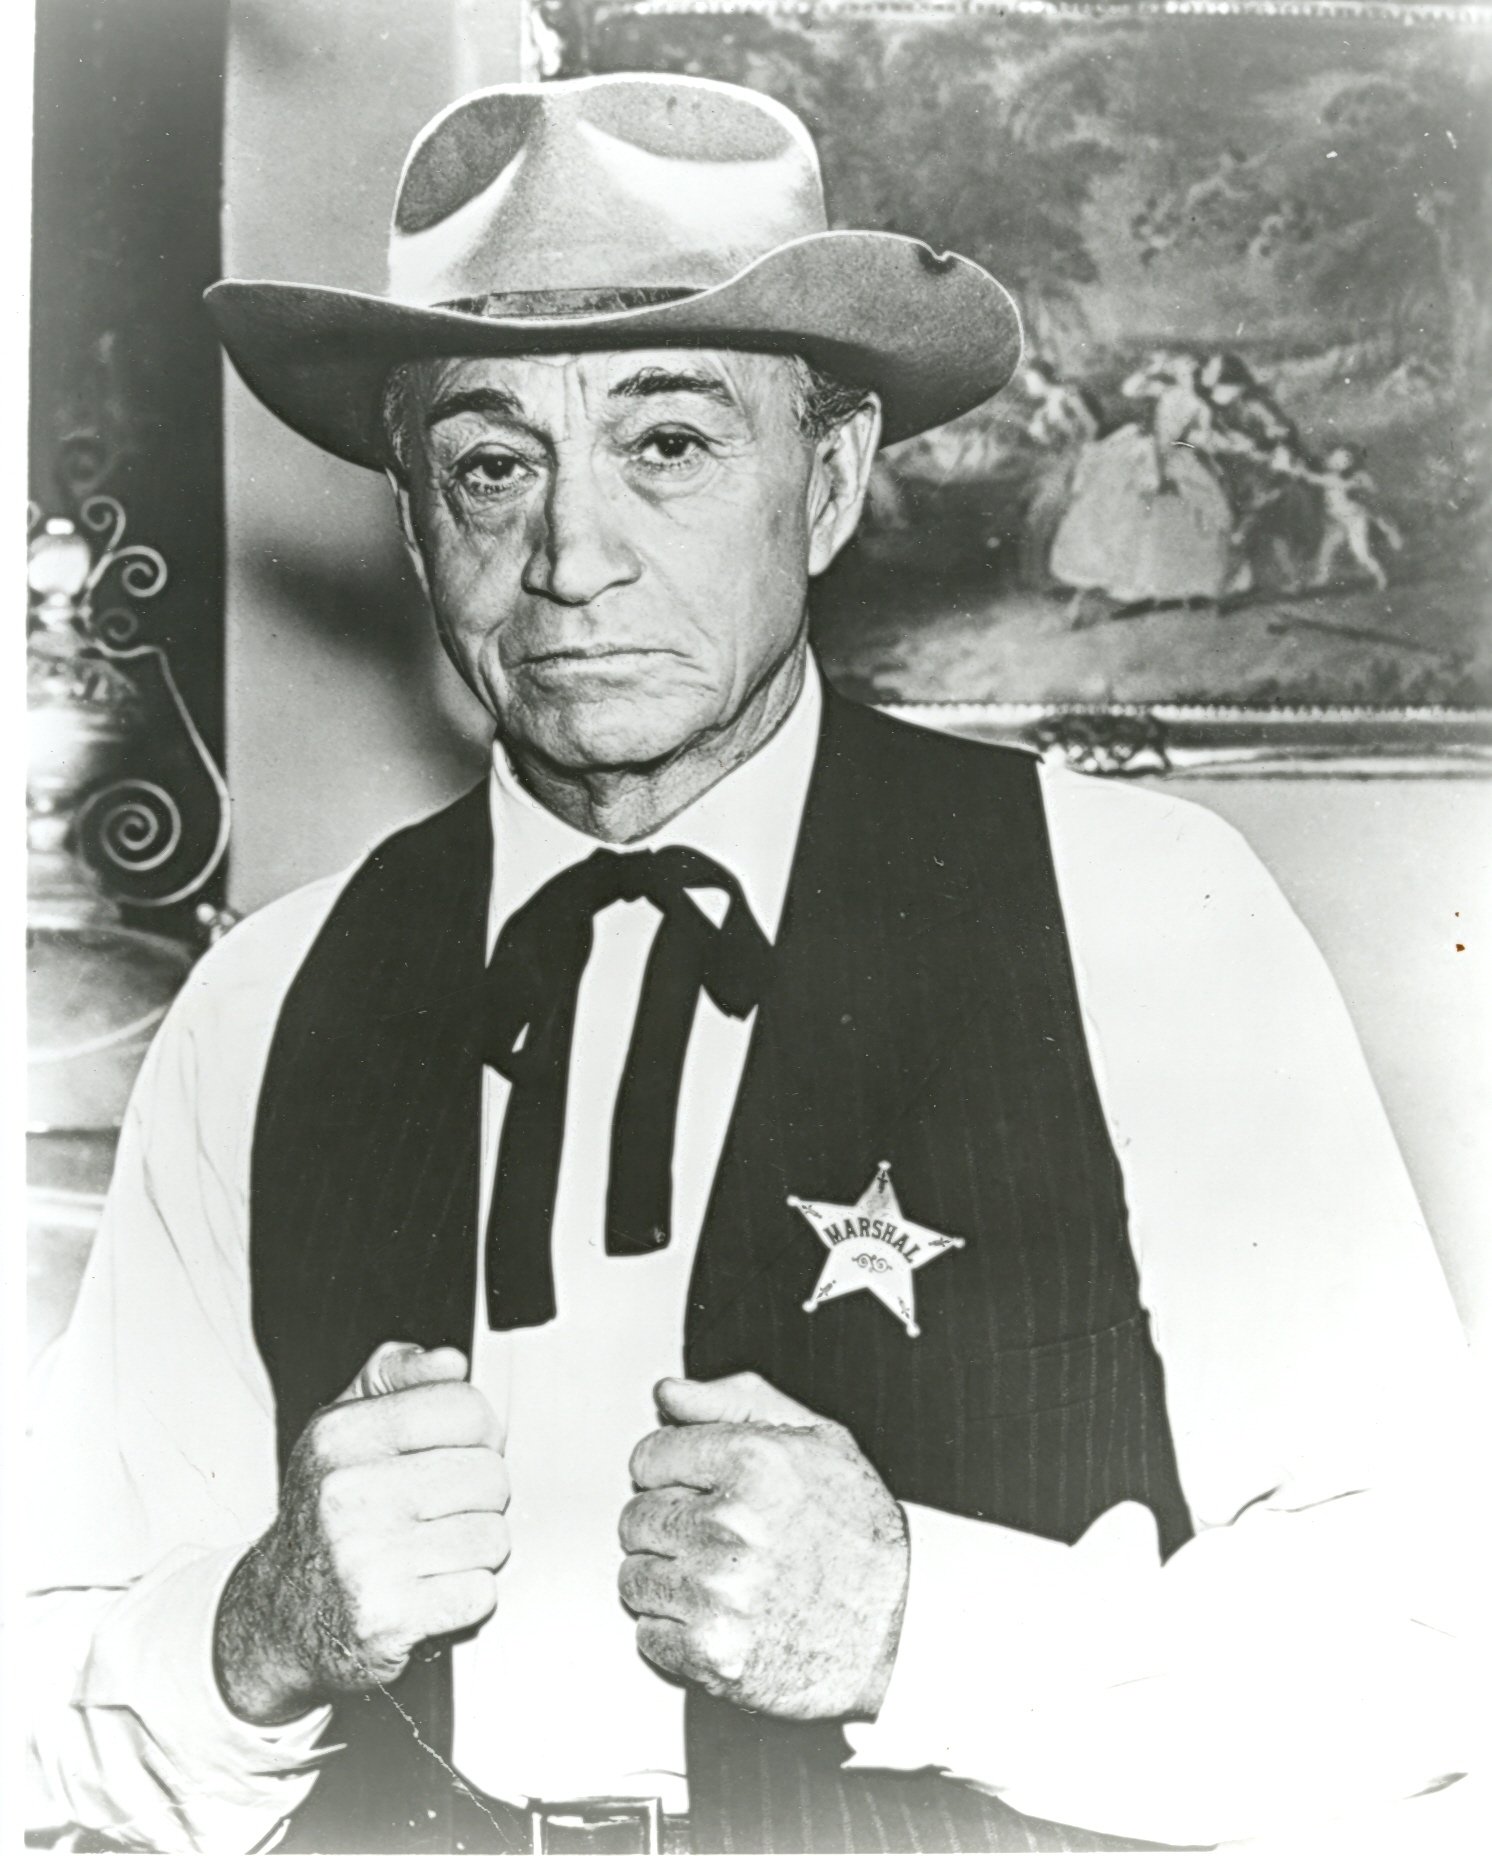 Gallery photo of Paul Fix as Marshall Micah Torrance in The Rifleman (1958-1963)